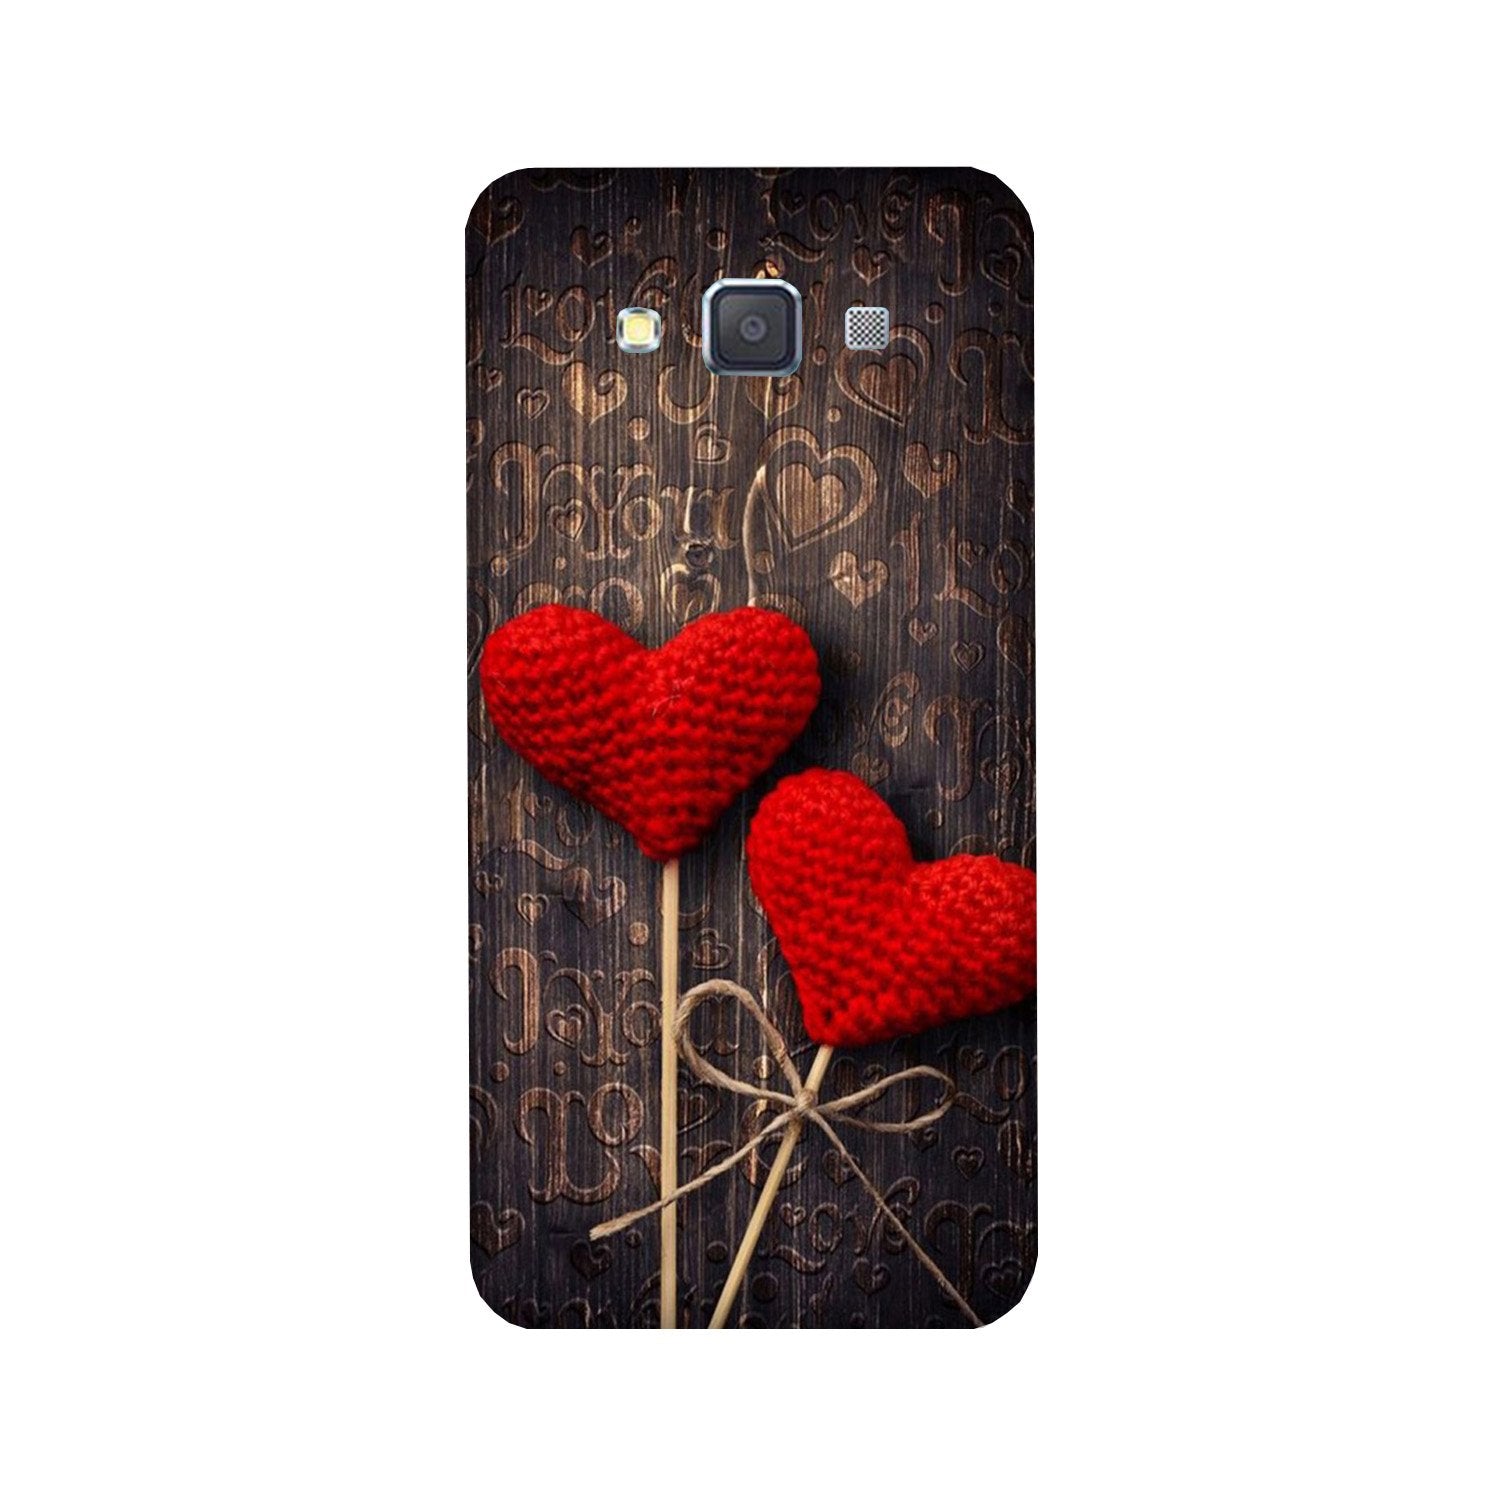 Red Hearts Case for Galaxy Grand Prime